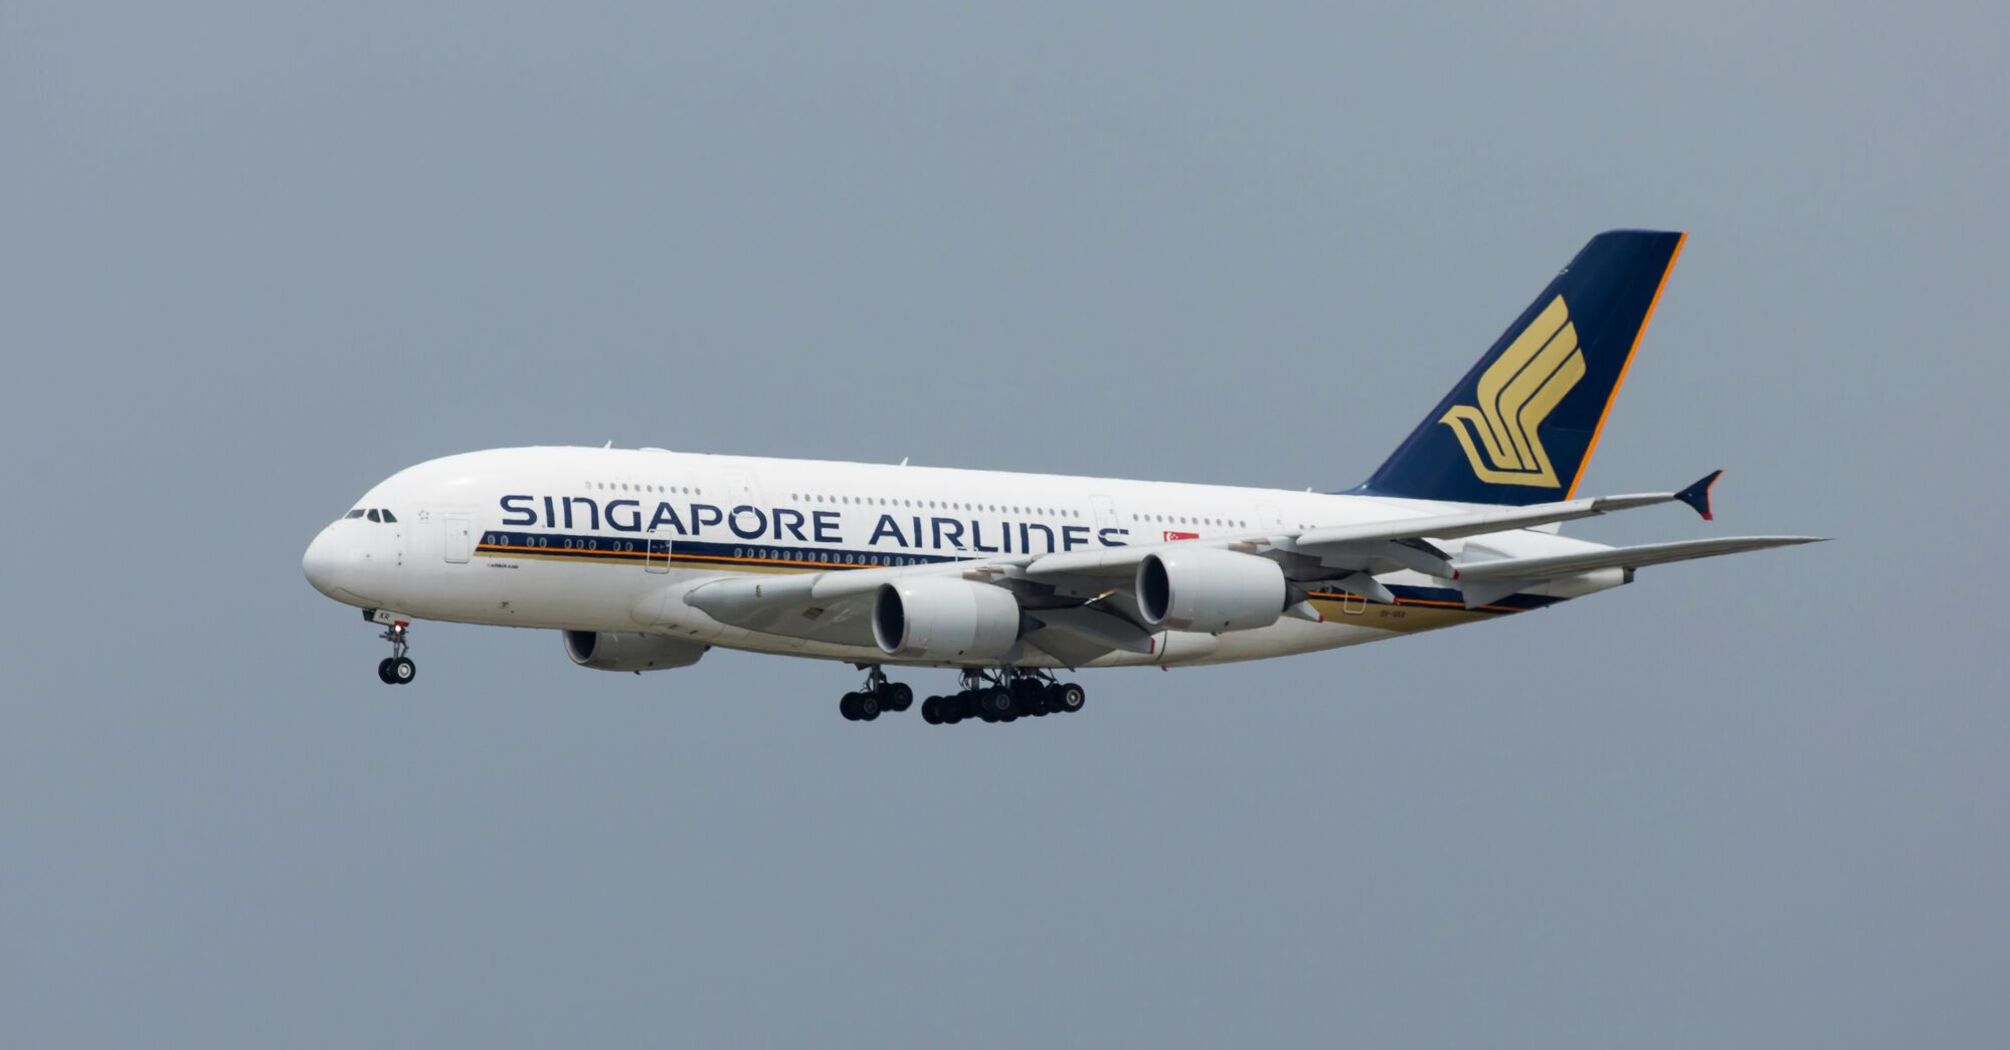 Singapore Airlines A380 landing at Sydney Airport.